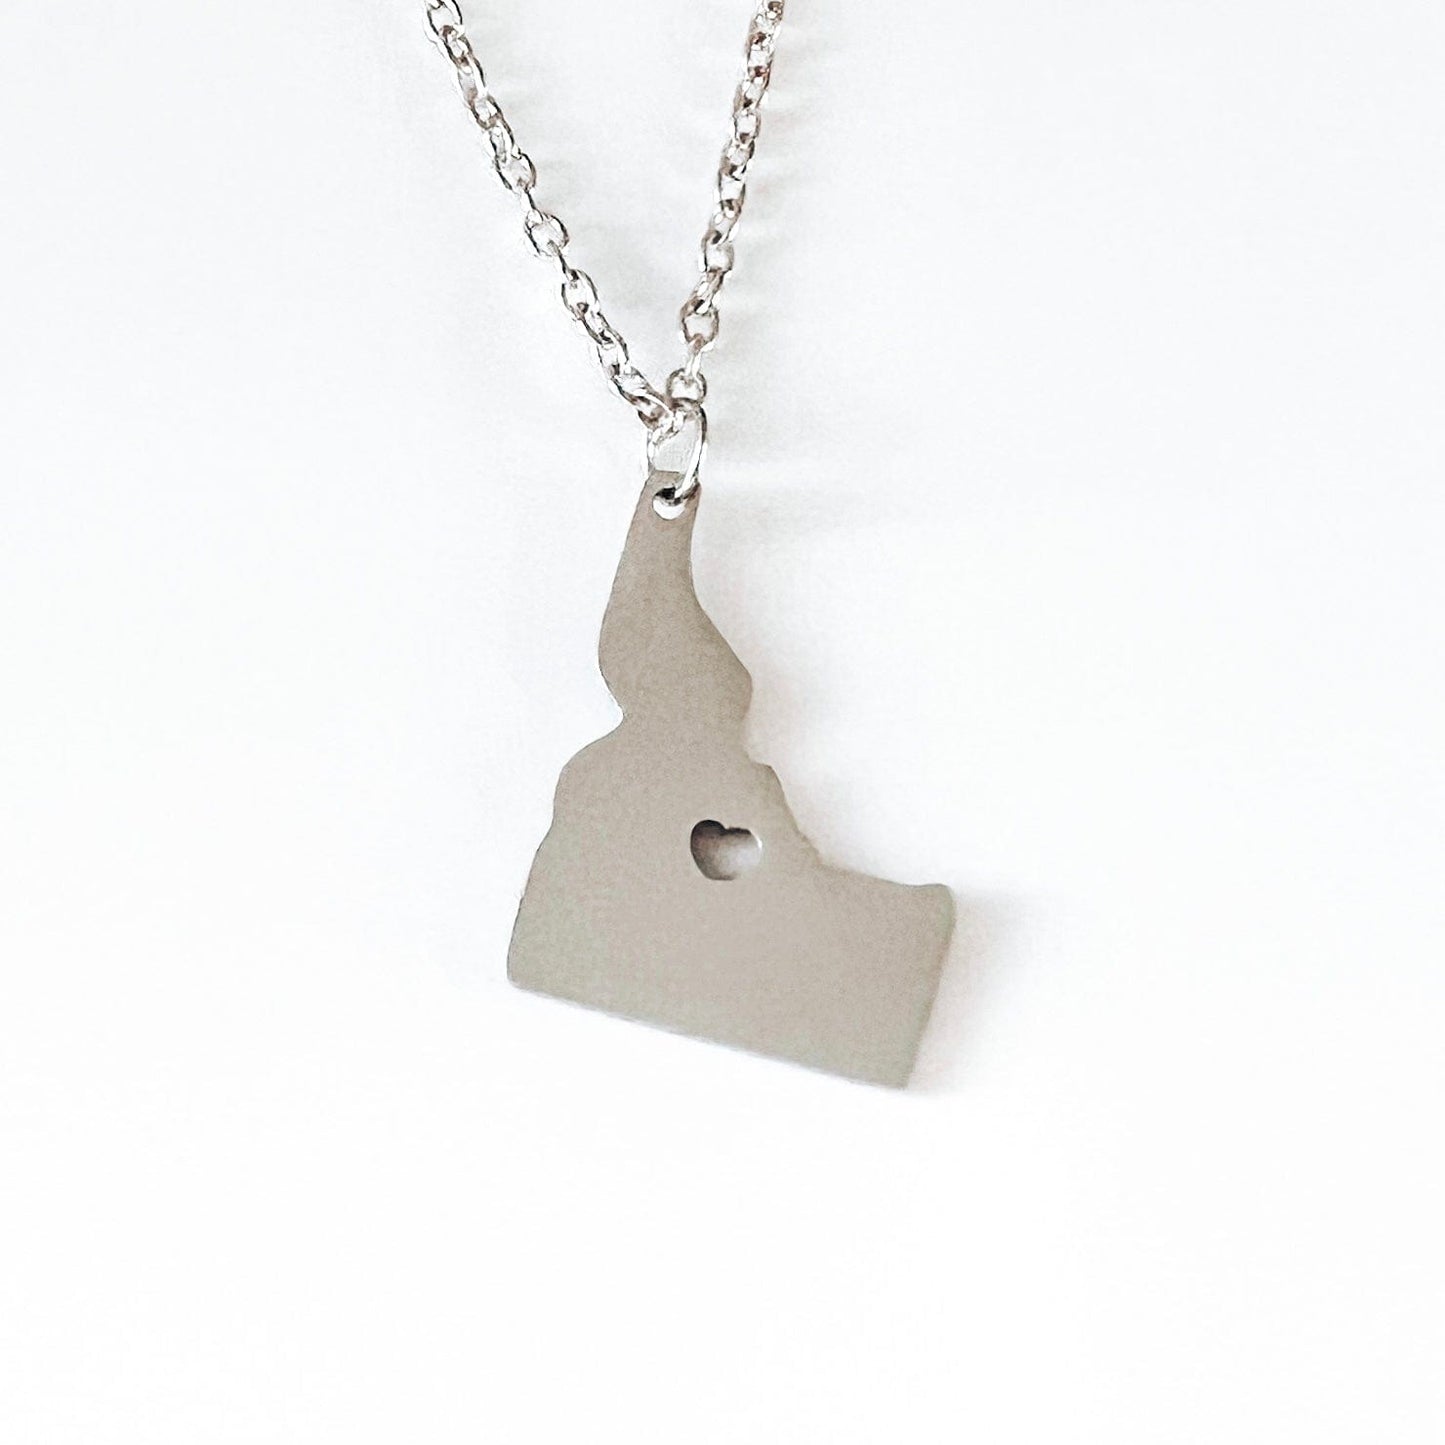 208 Supply Co Jewelry Stainless Steel Idaho Necklace